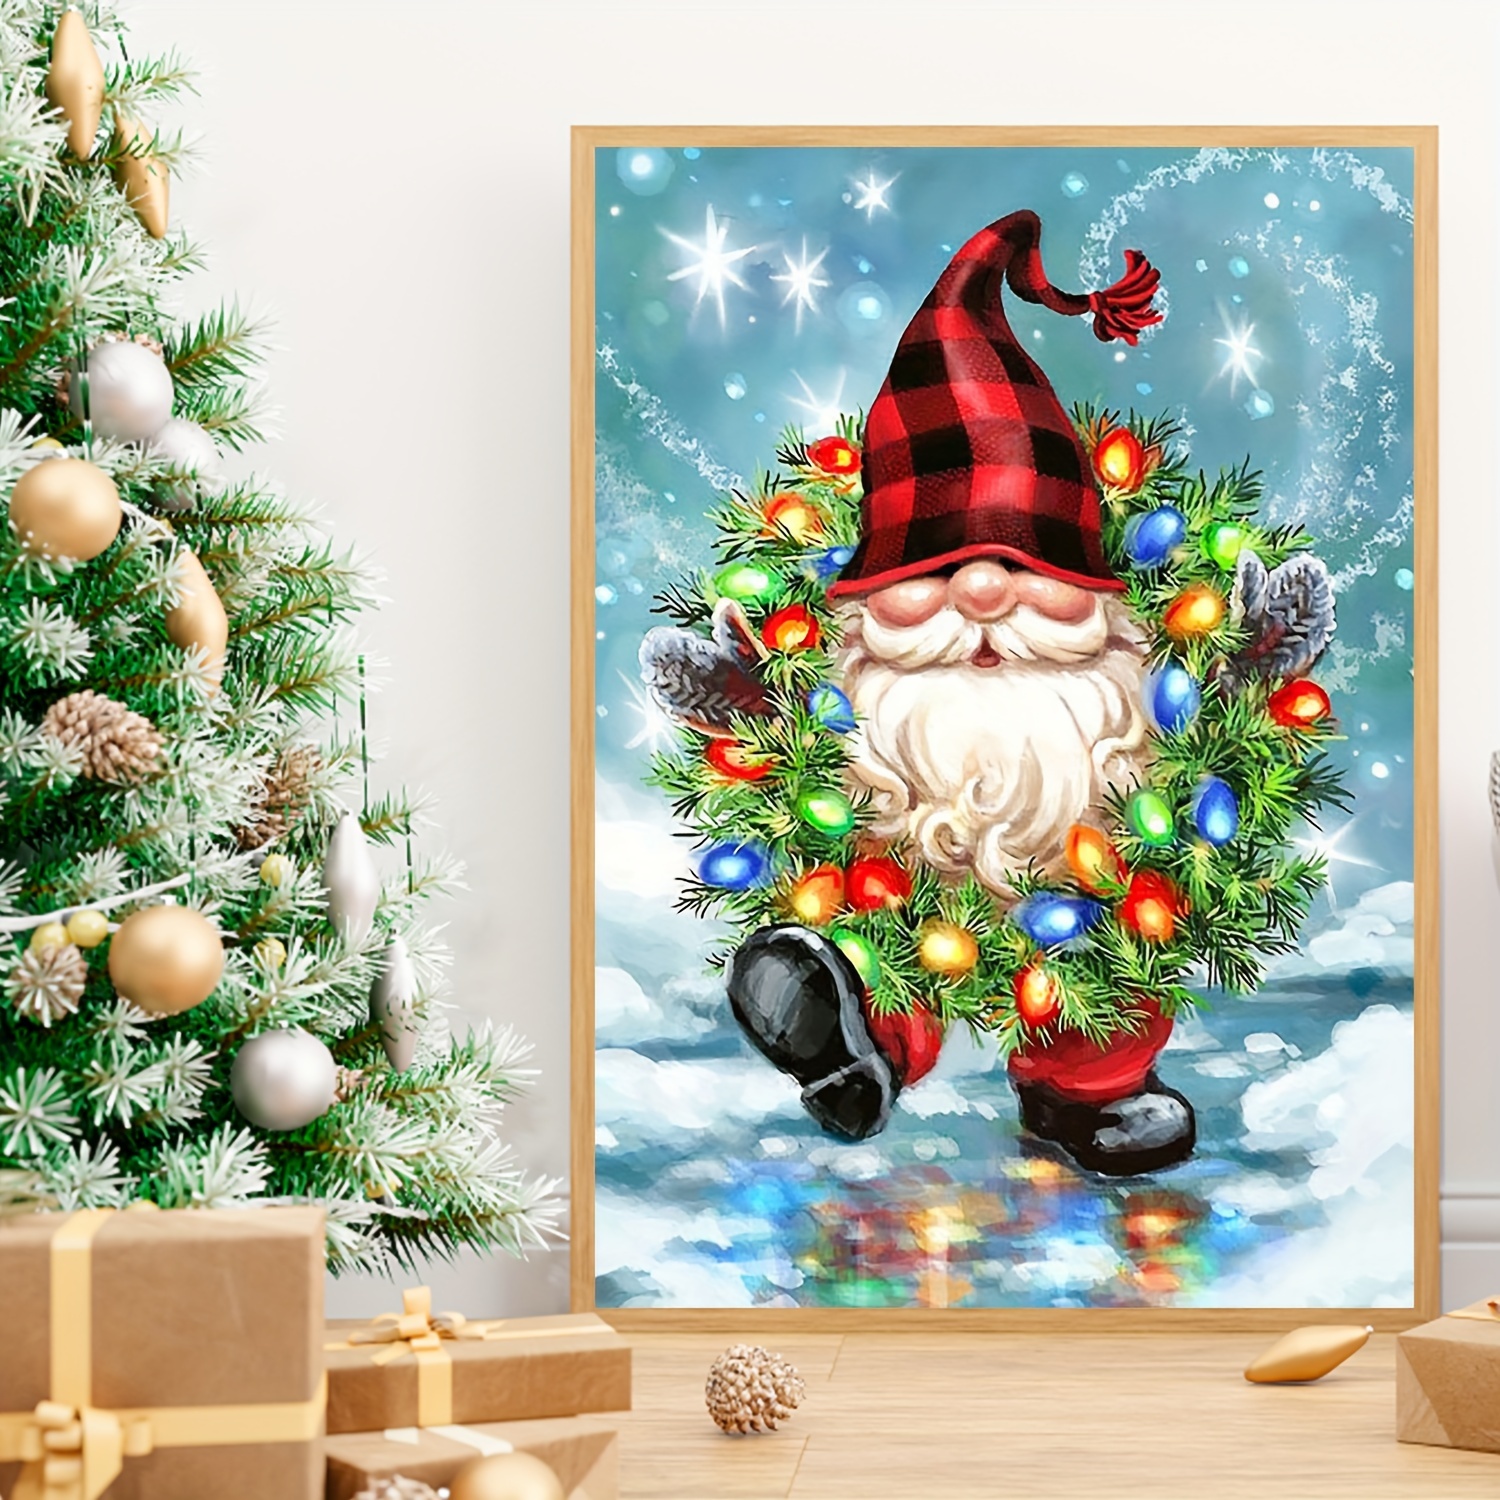 Christmas Diamond Art Painting Kits for Adults - 5D Round Full